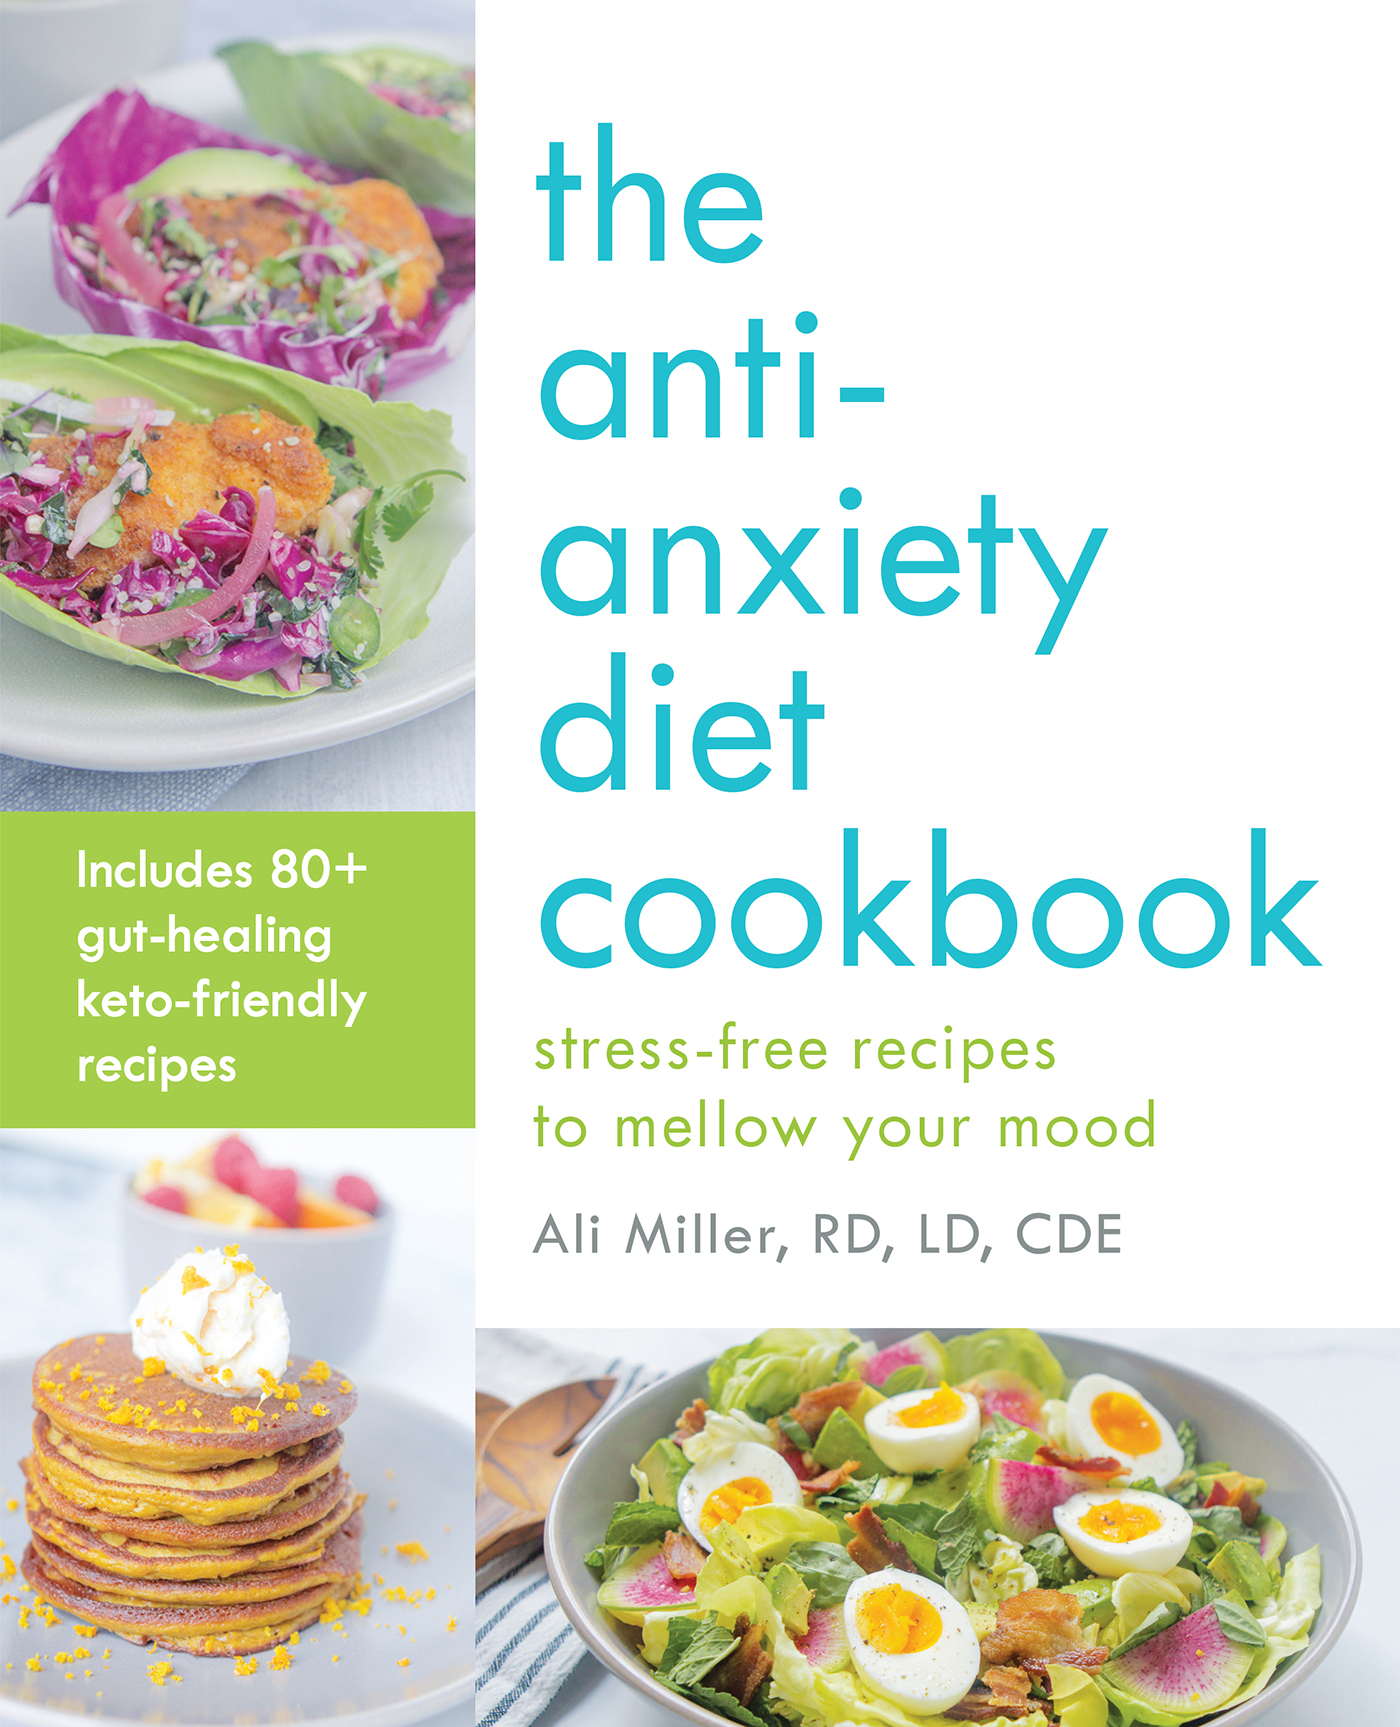 antianxietydiet_cookbook-cover.indd